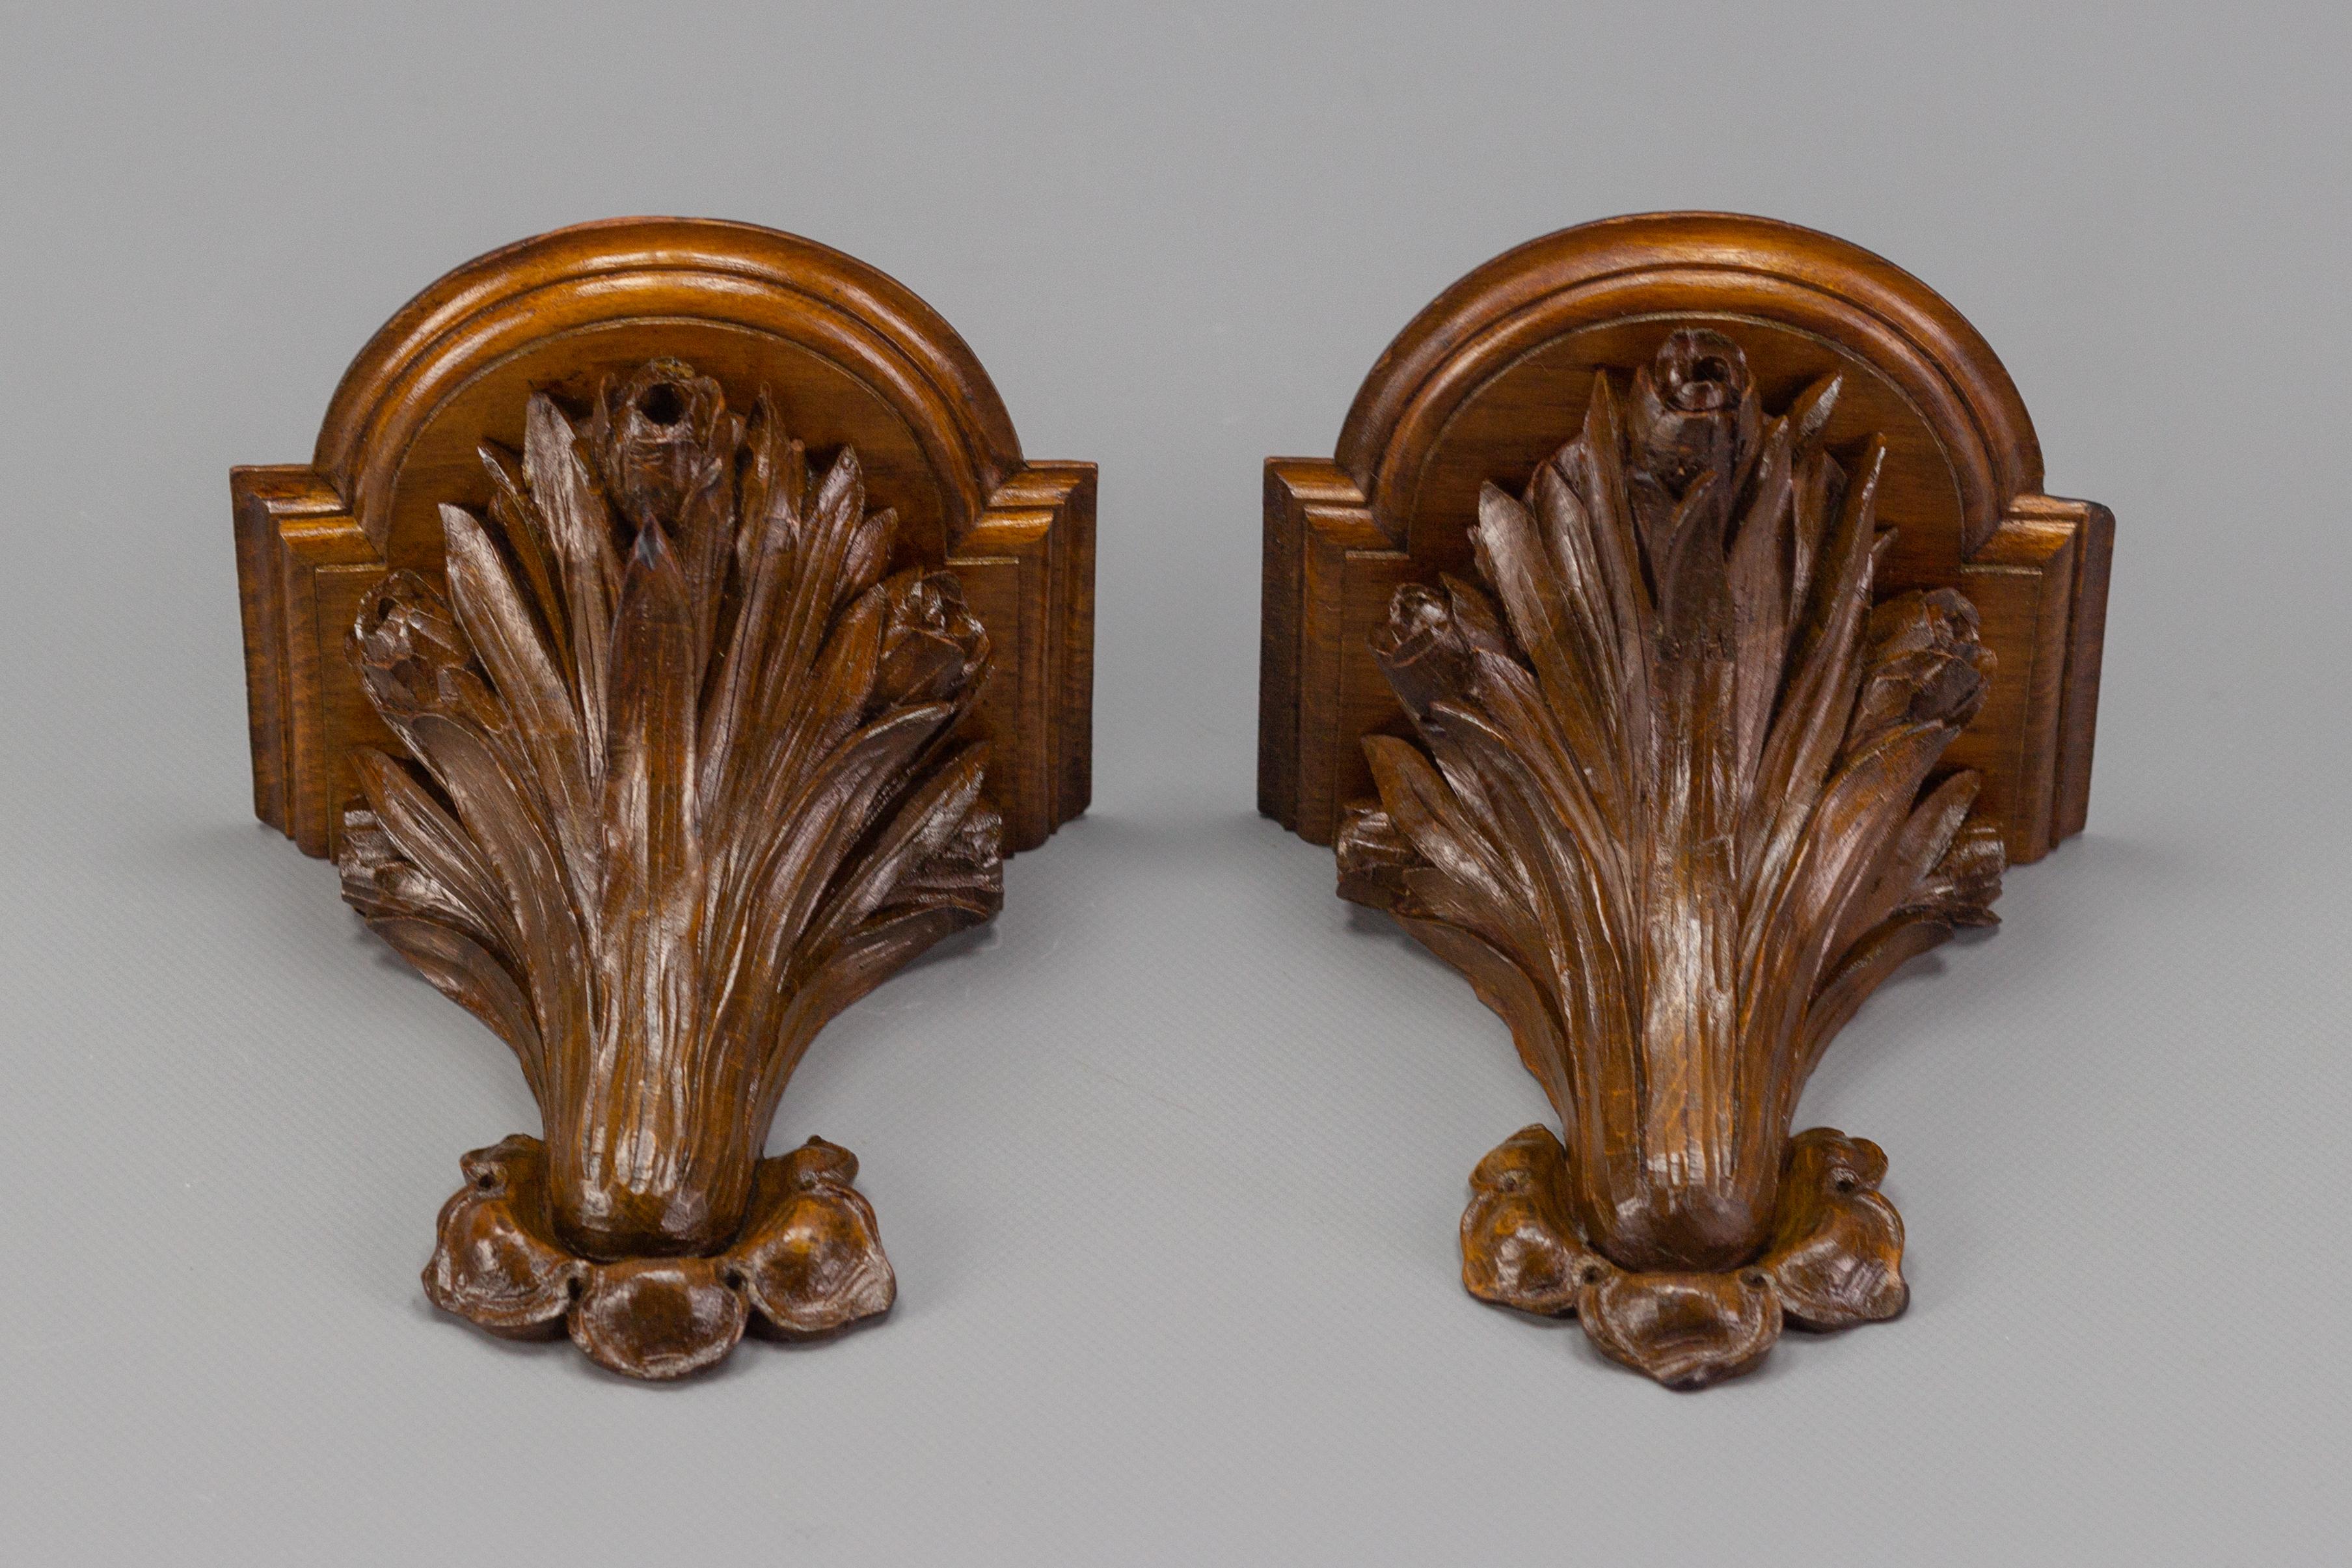 An adorable pair of French Art Nouveau wall brackets with beautifully carved floral motifs from circa the 1920s.
Dimensions: height: 15 cm / 5.9 in; width: 14 cm / 5.51 in; depth: 12 cm / 4.72 in.